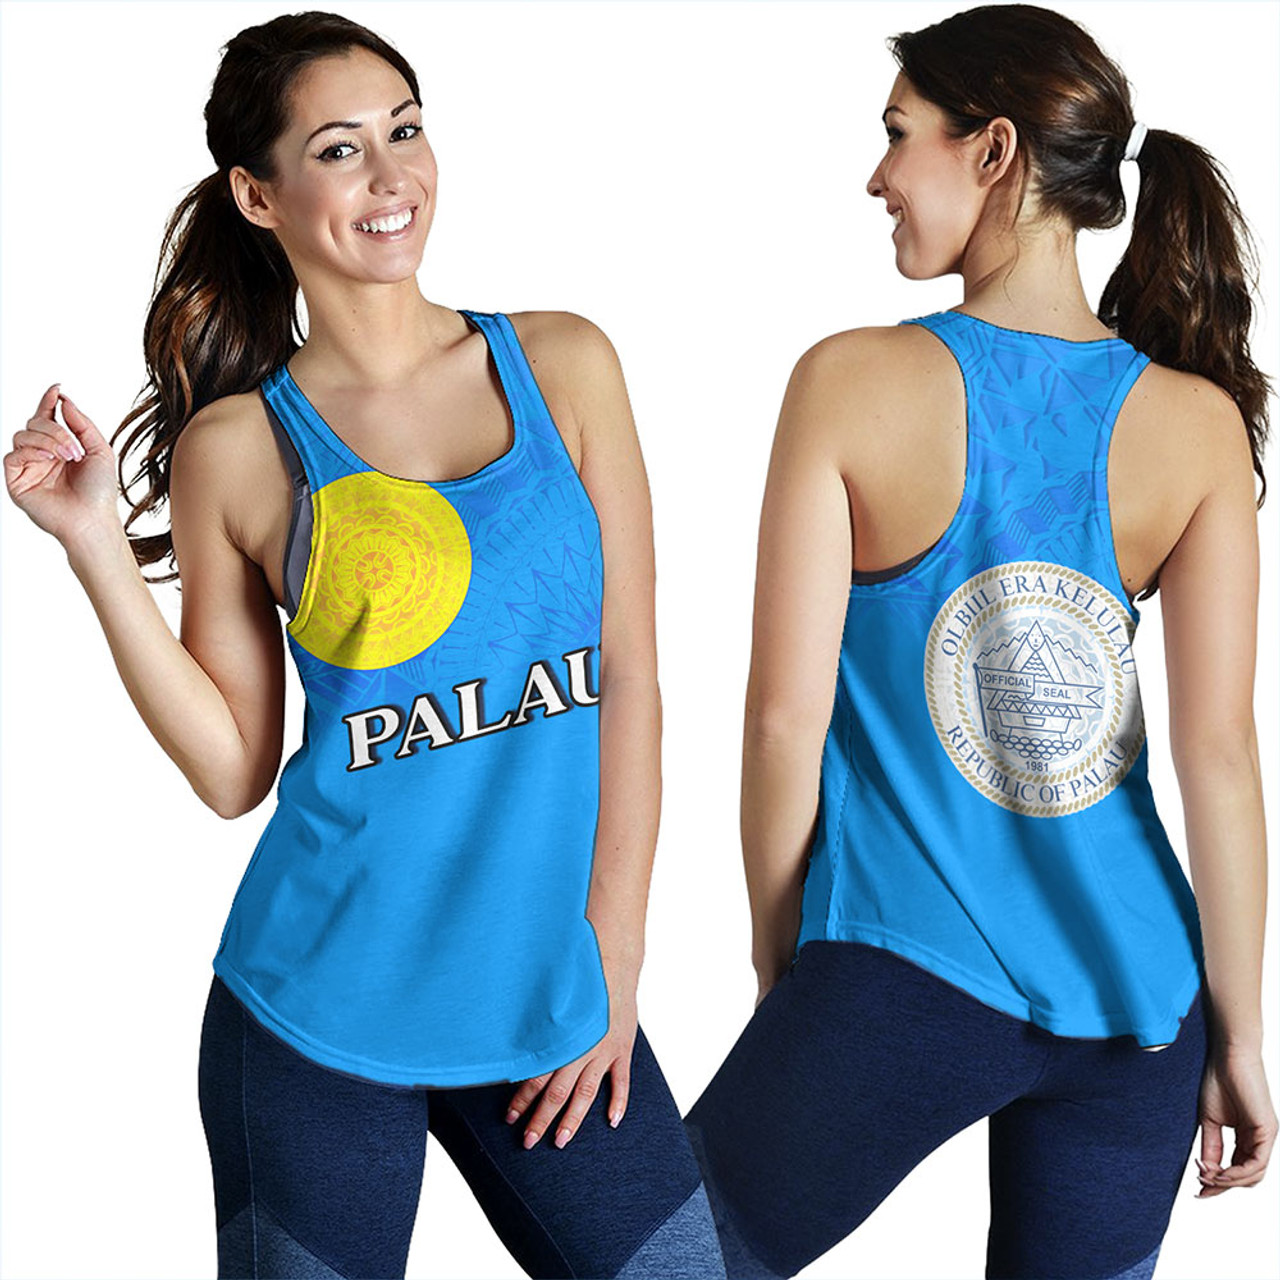 Palau Women Tank Flag Color With Traditional Patterns